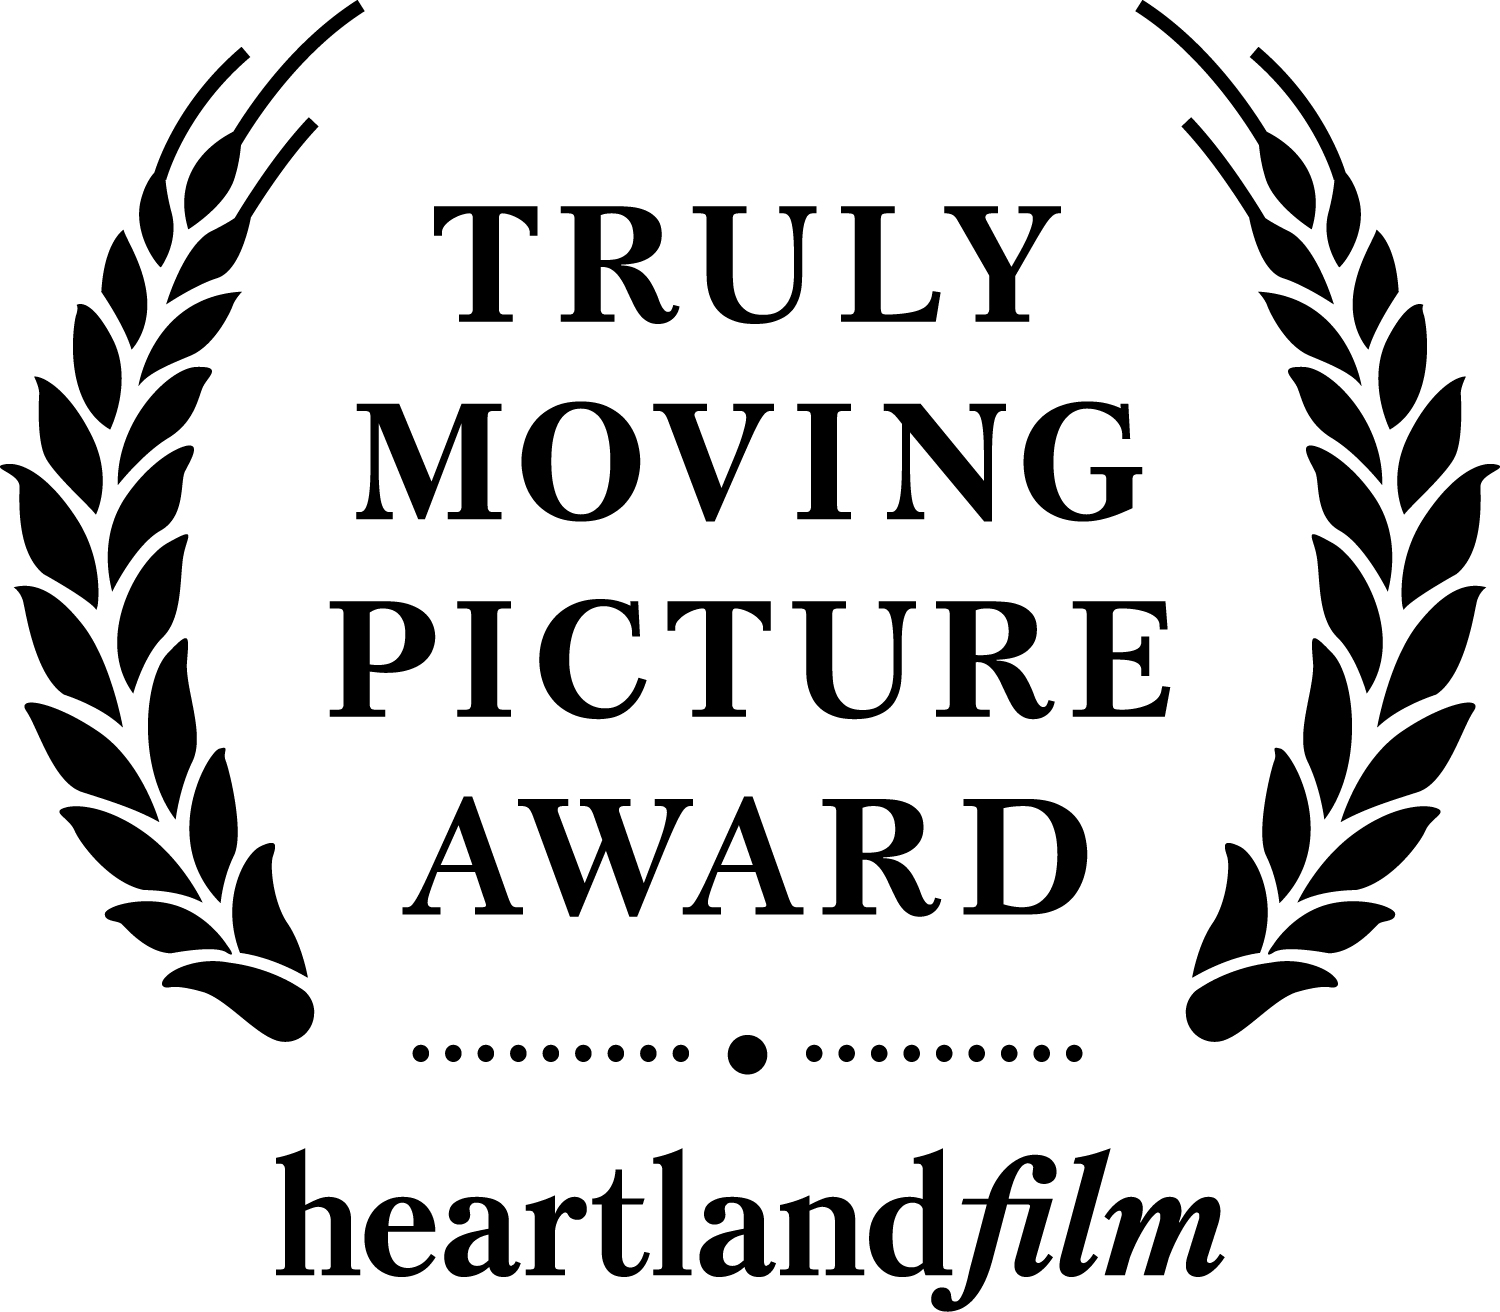 Truly Moving Picture Award laurel